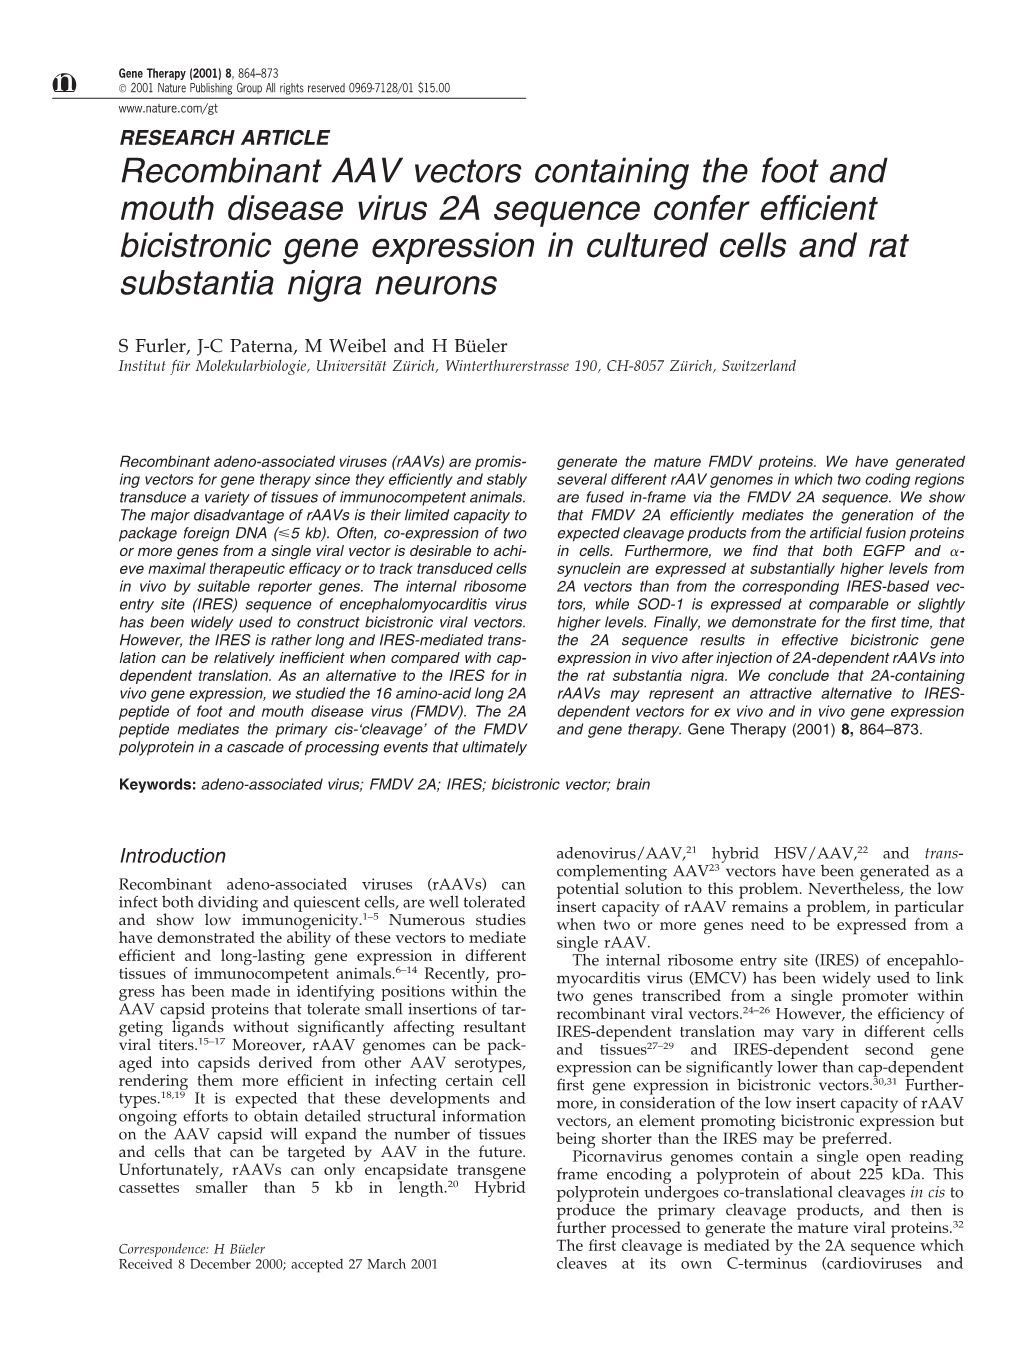 Recombinant AAV Vectors Containing the Foot and Mouth Disease Virus 2A